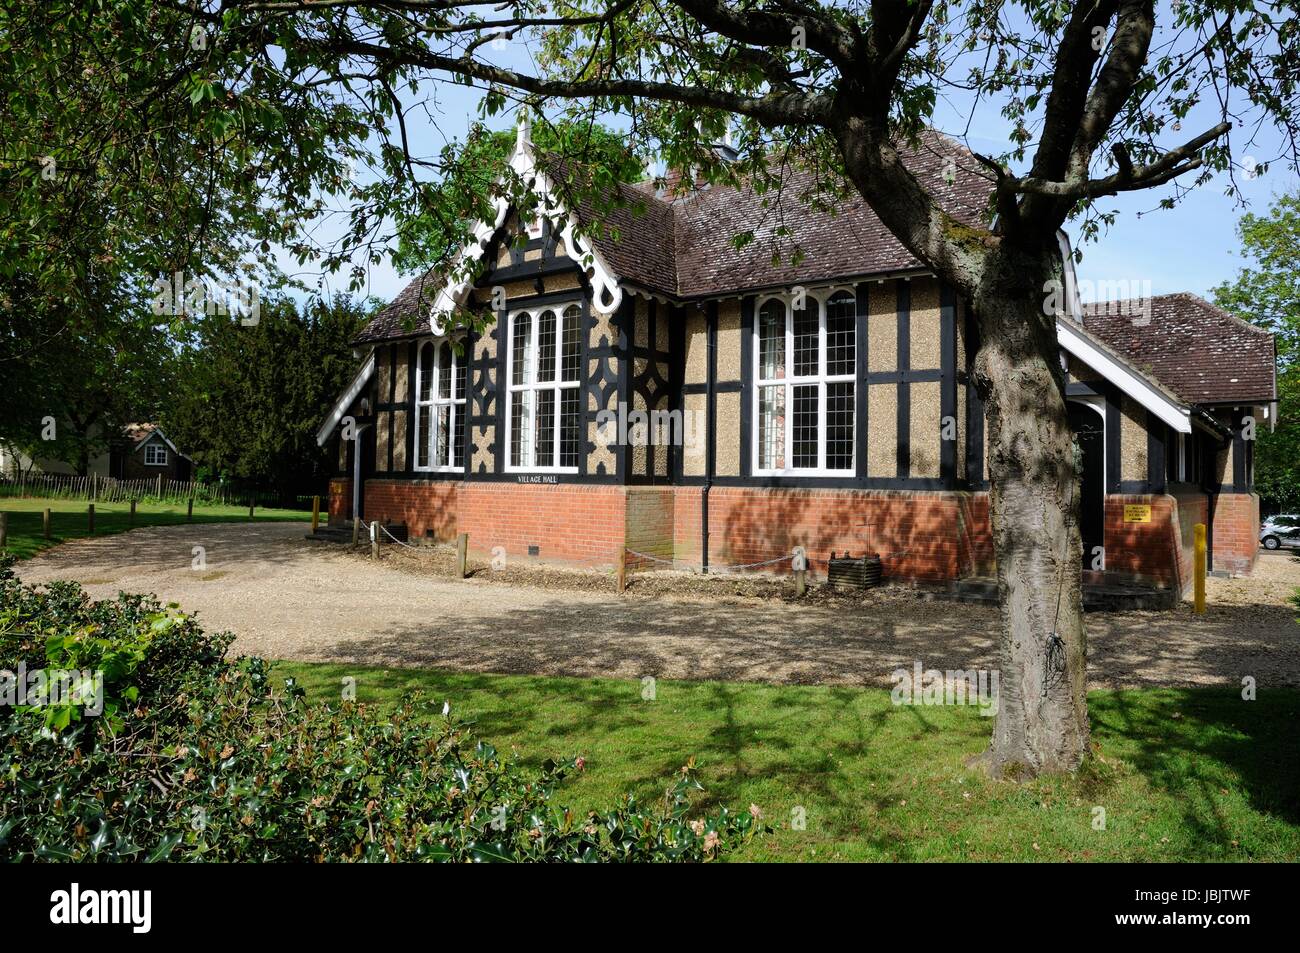 The Old Warden Village Hall. Old Bedfordshire, was built in 1901 by Joseph Shuttleworth originally as a reading room. Stock Photo